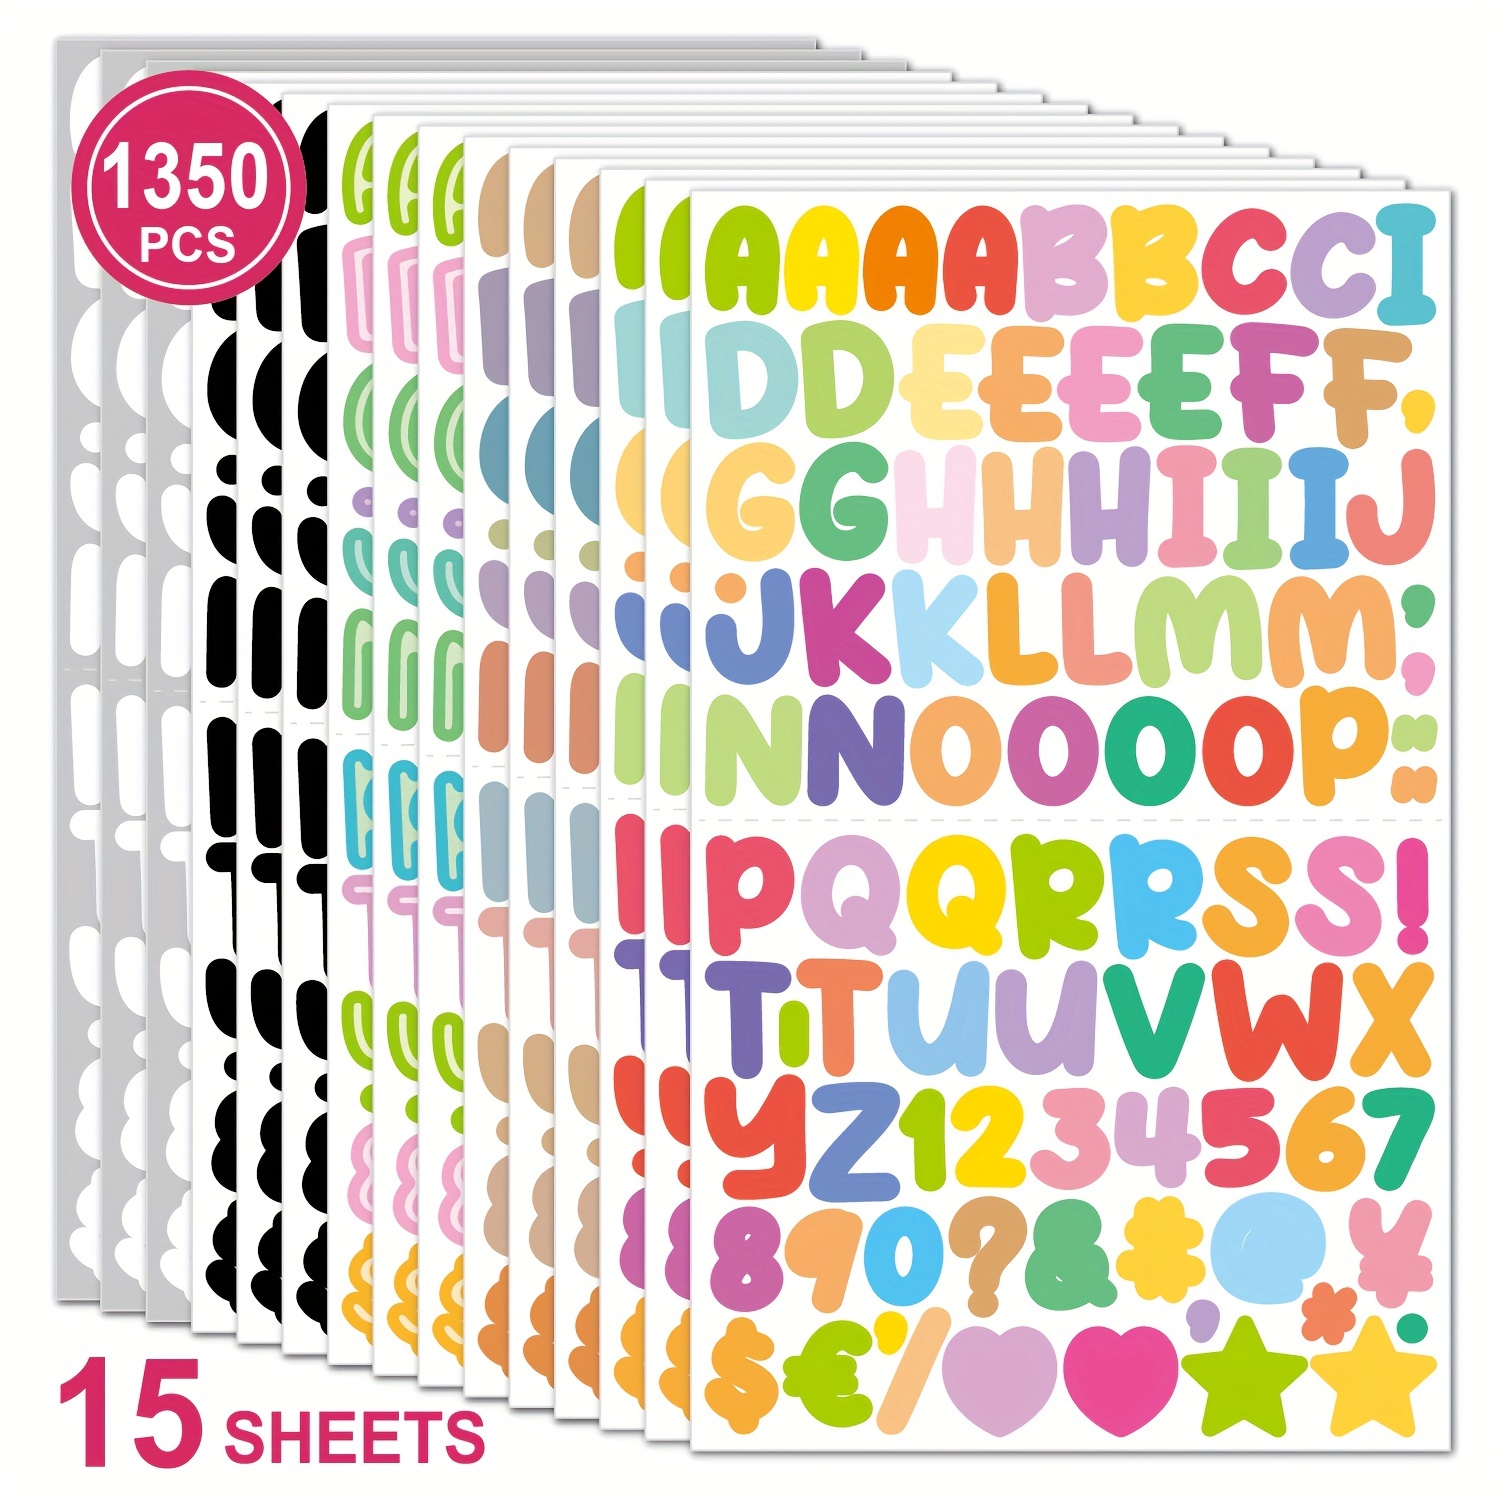 6 Sheets 3mm Bling Alphabet Letters Number Stickers for Resin